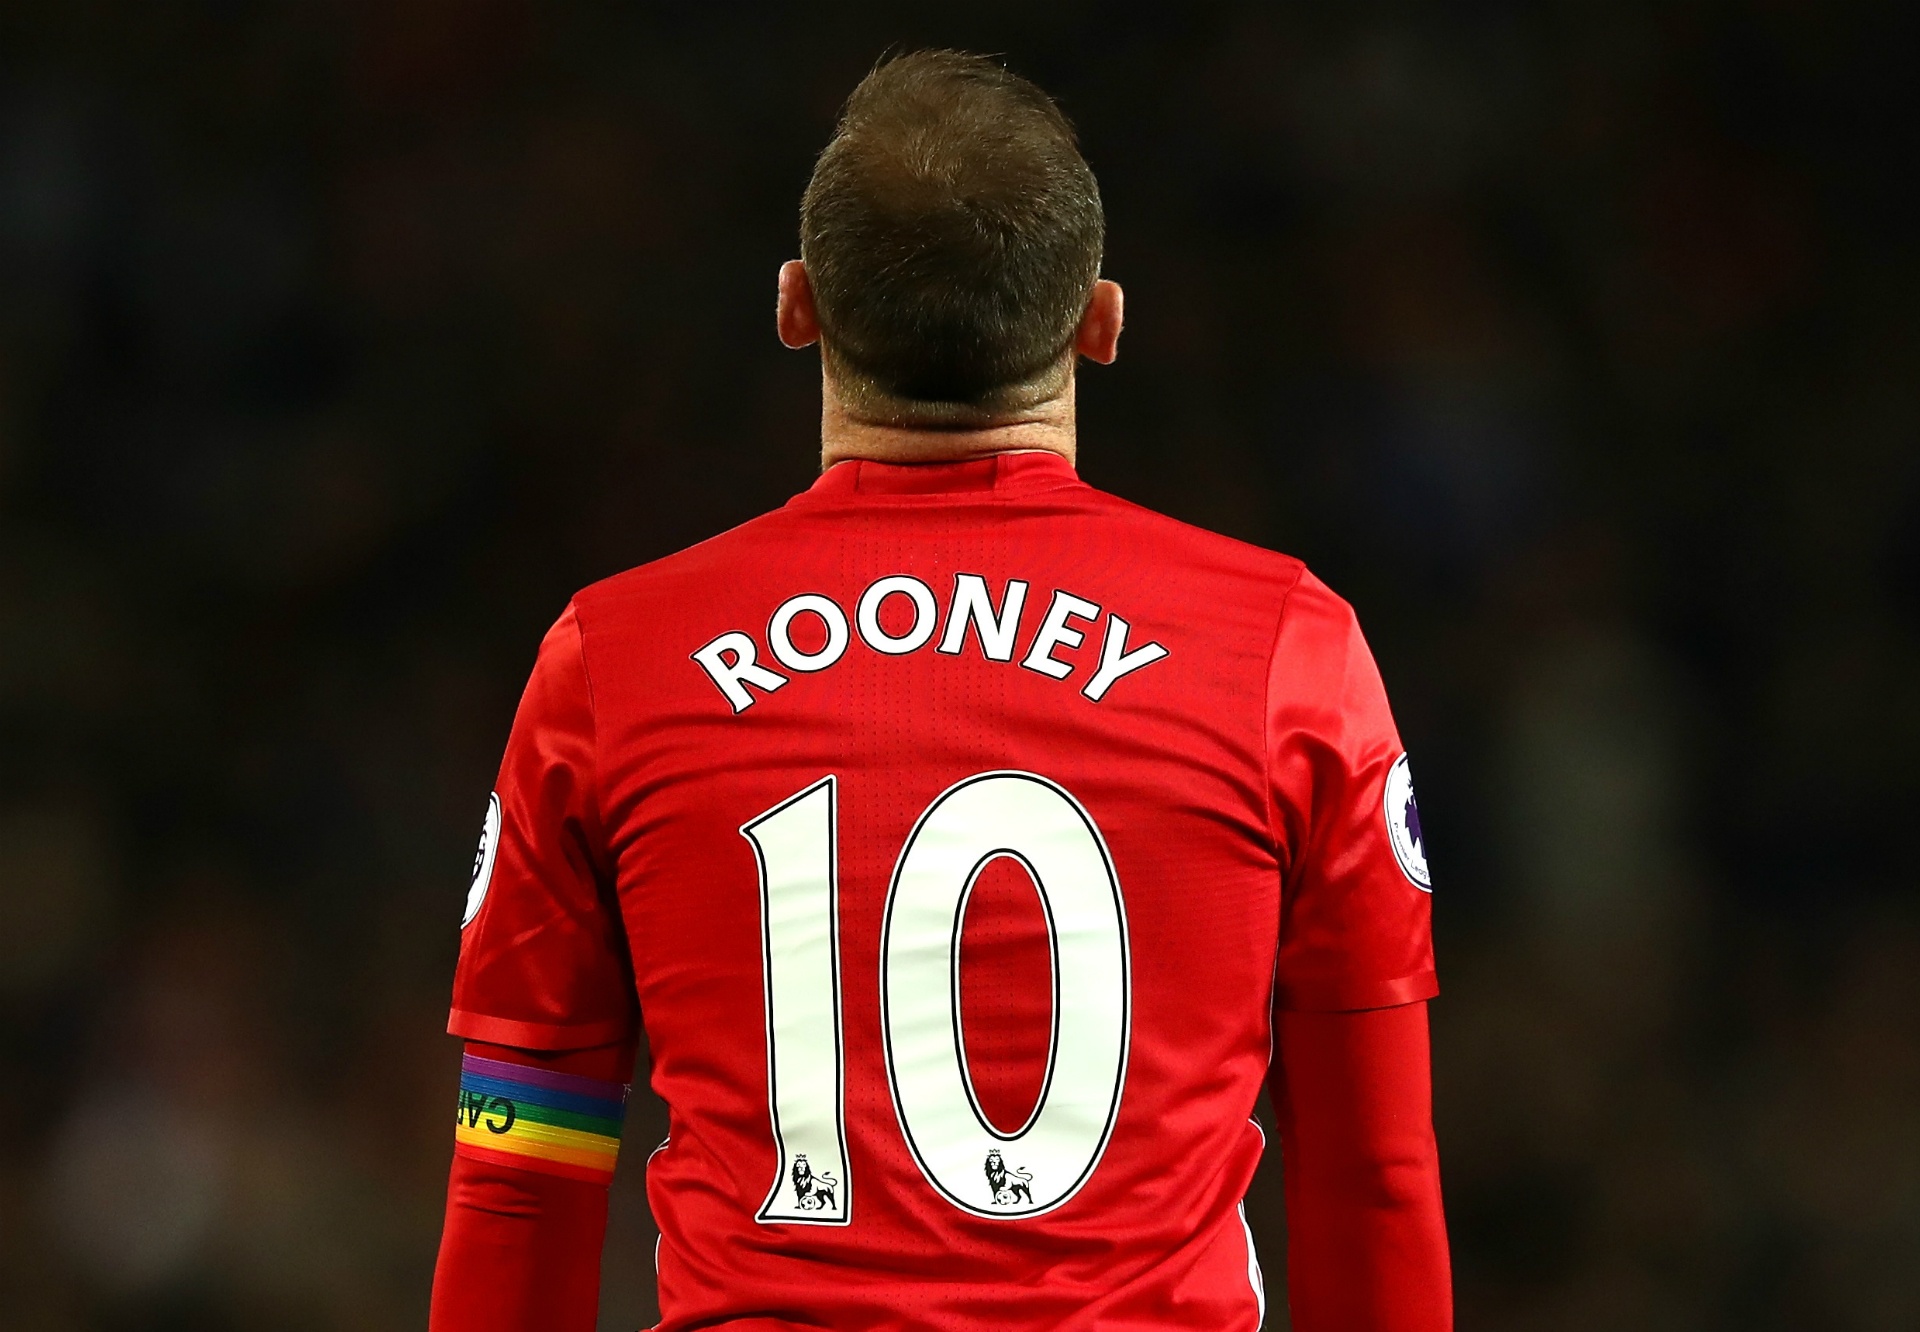 rooney jersey manchester united